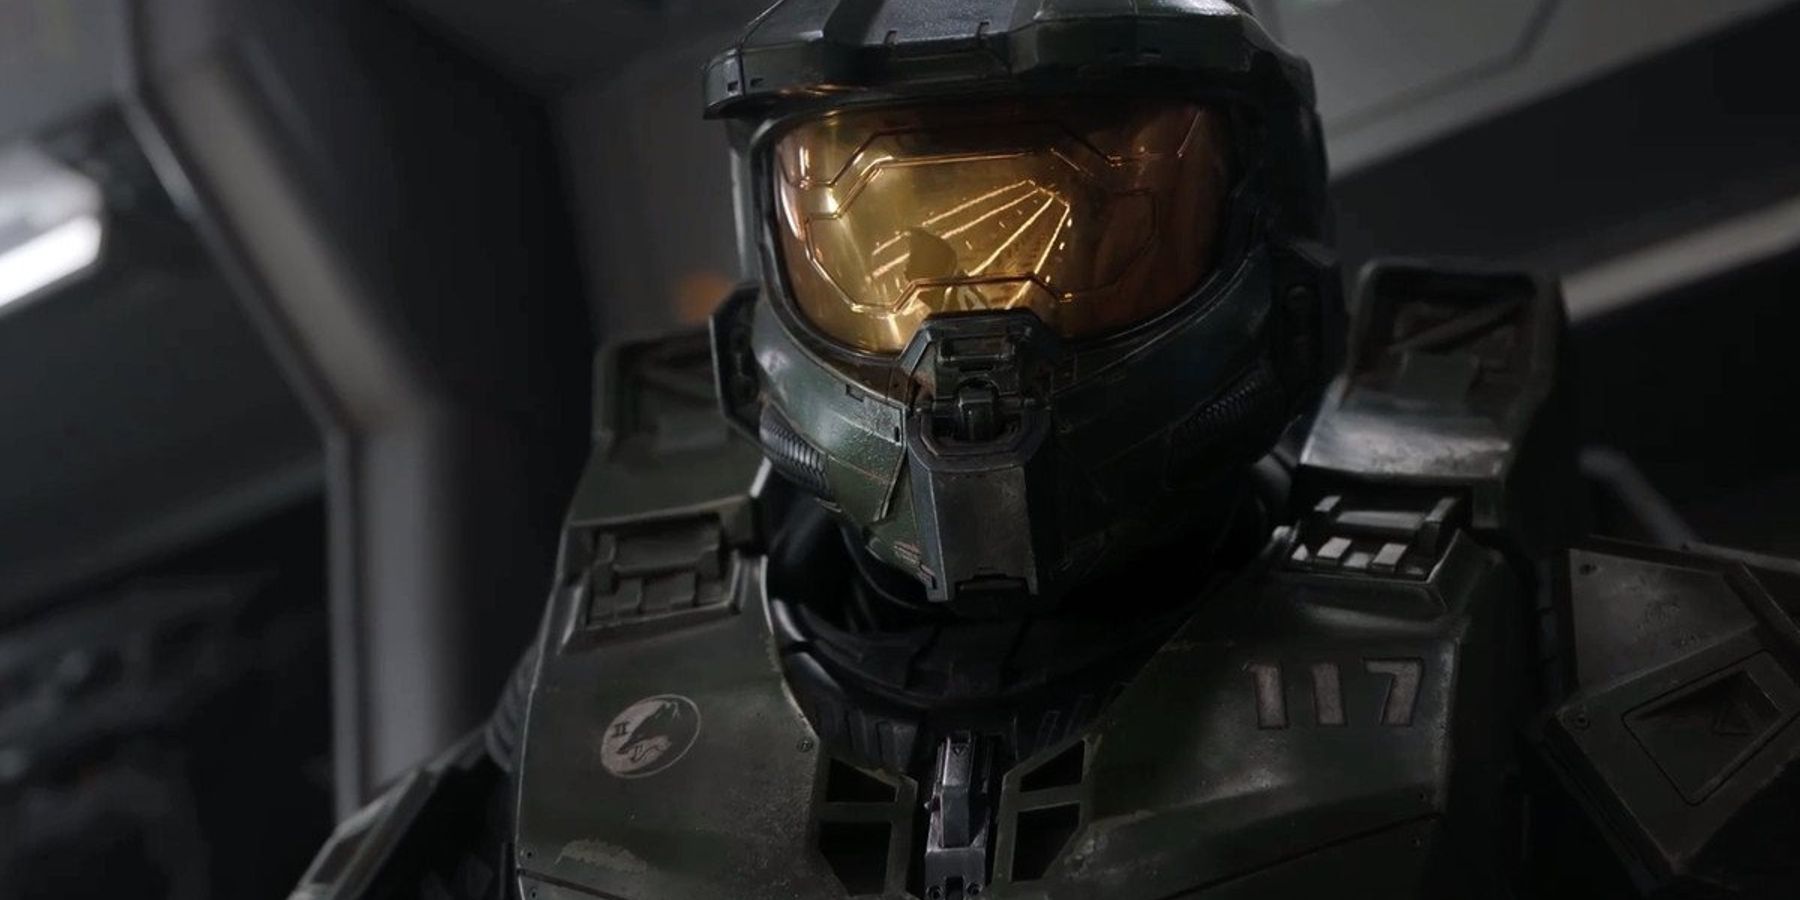 New Halo trailer drops a week ahead of its premiere on Paramount